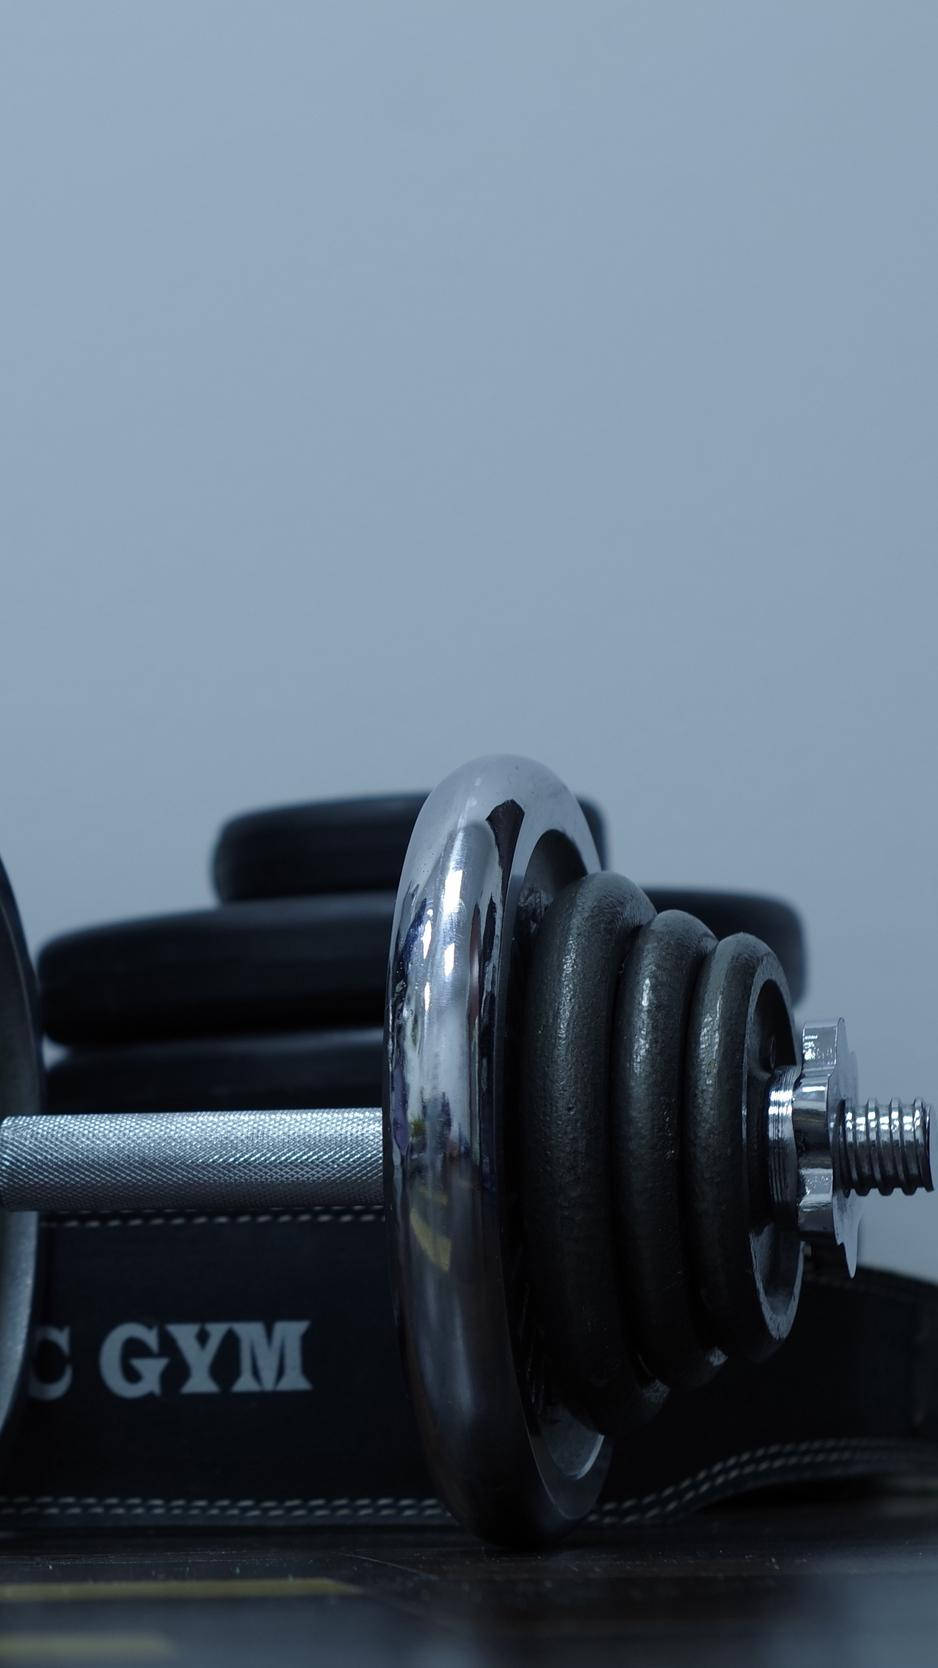 A Gym Dumbbell And A Black Belt On A Table Wallpaper